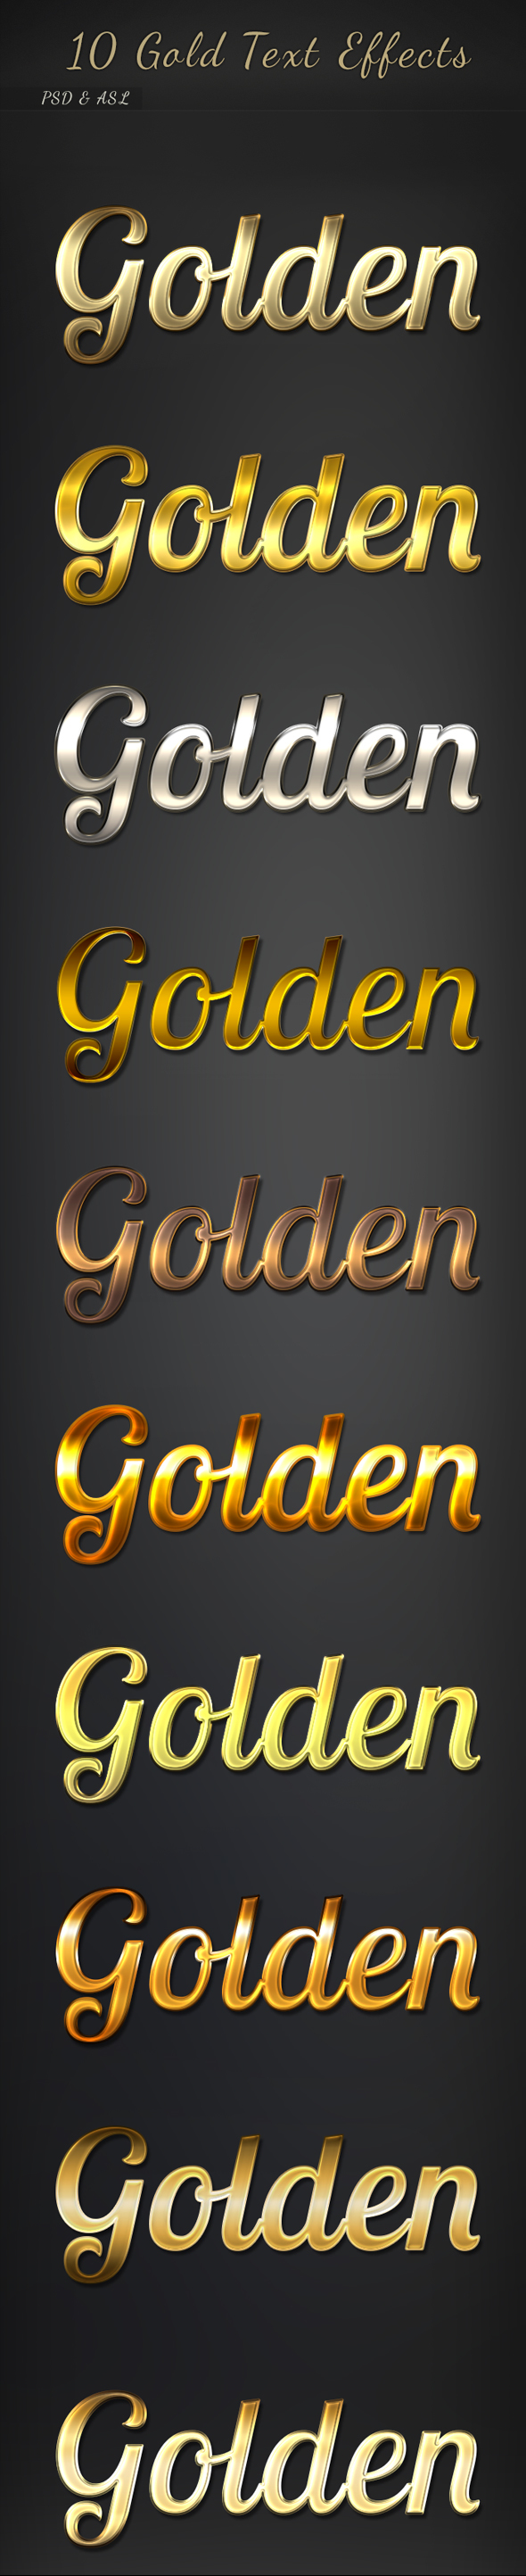 10 Gold Text Effects